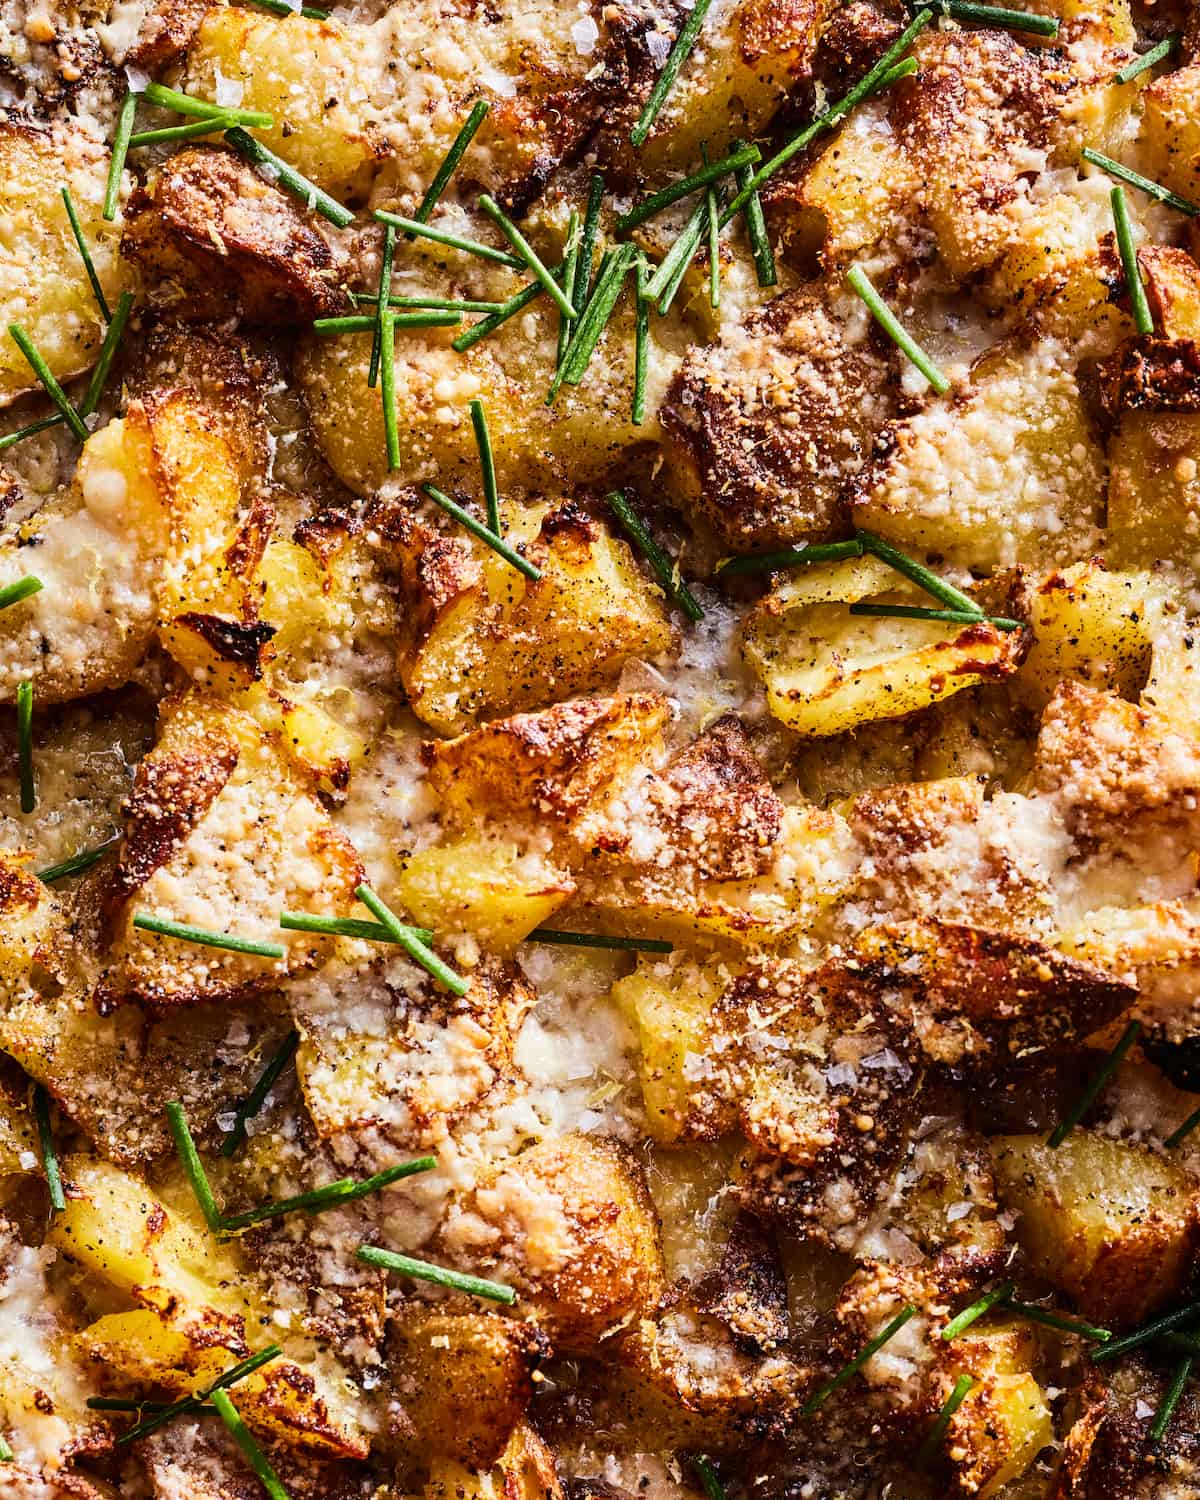 An overhead tight shot of cubed golden crispy roasted potatoes with melted parmesan cheese and chives